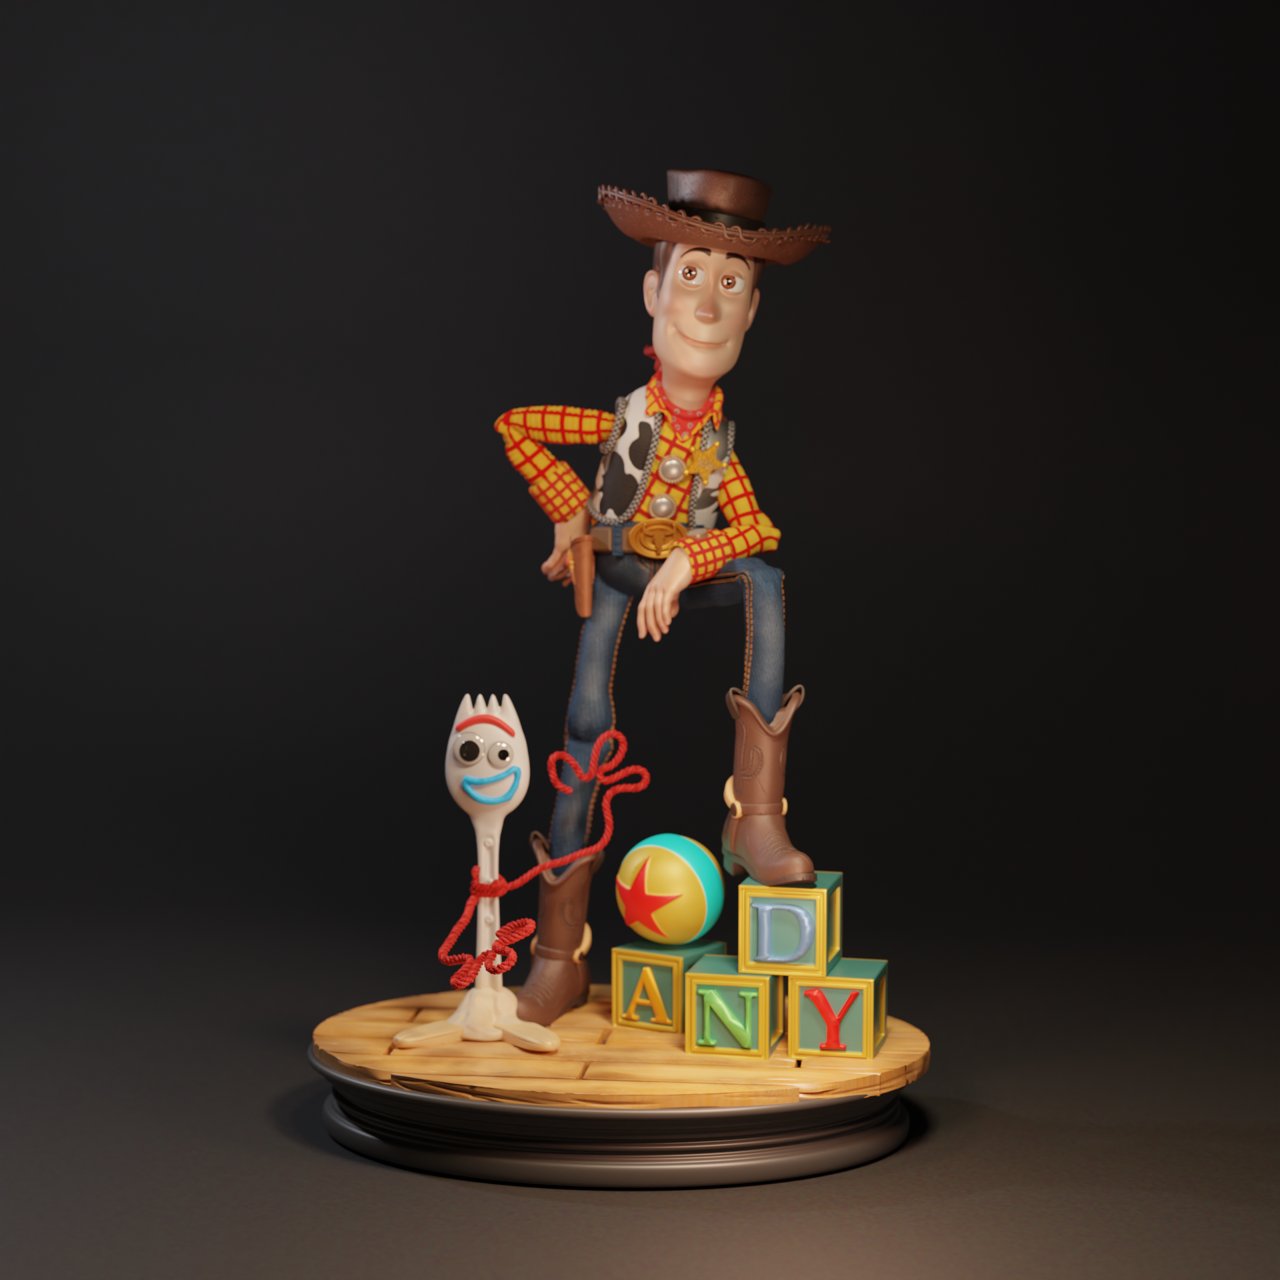 Fan Art Models Woody And Forky  MINISTL 2